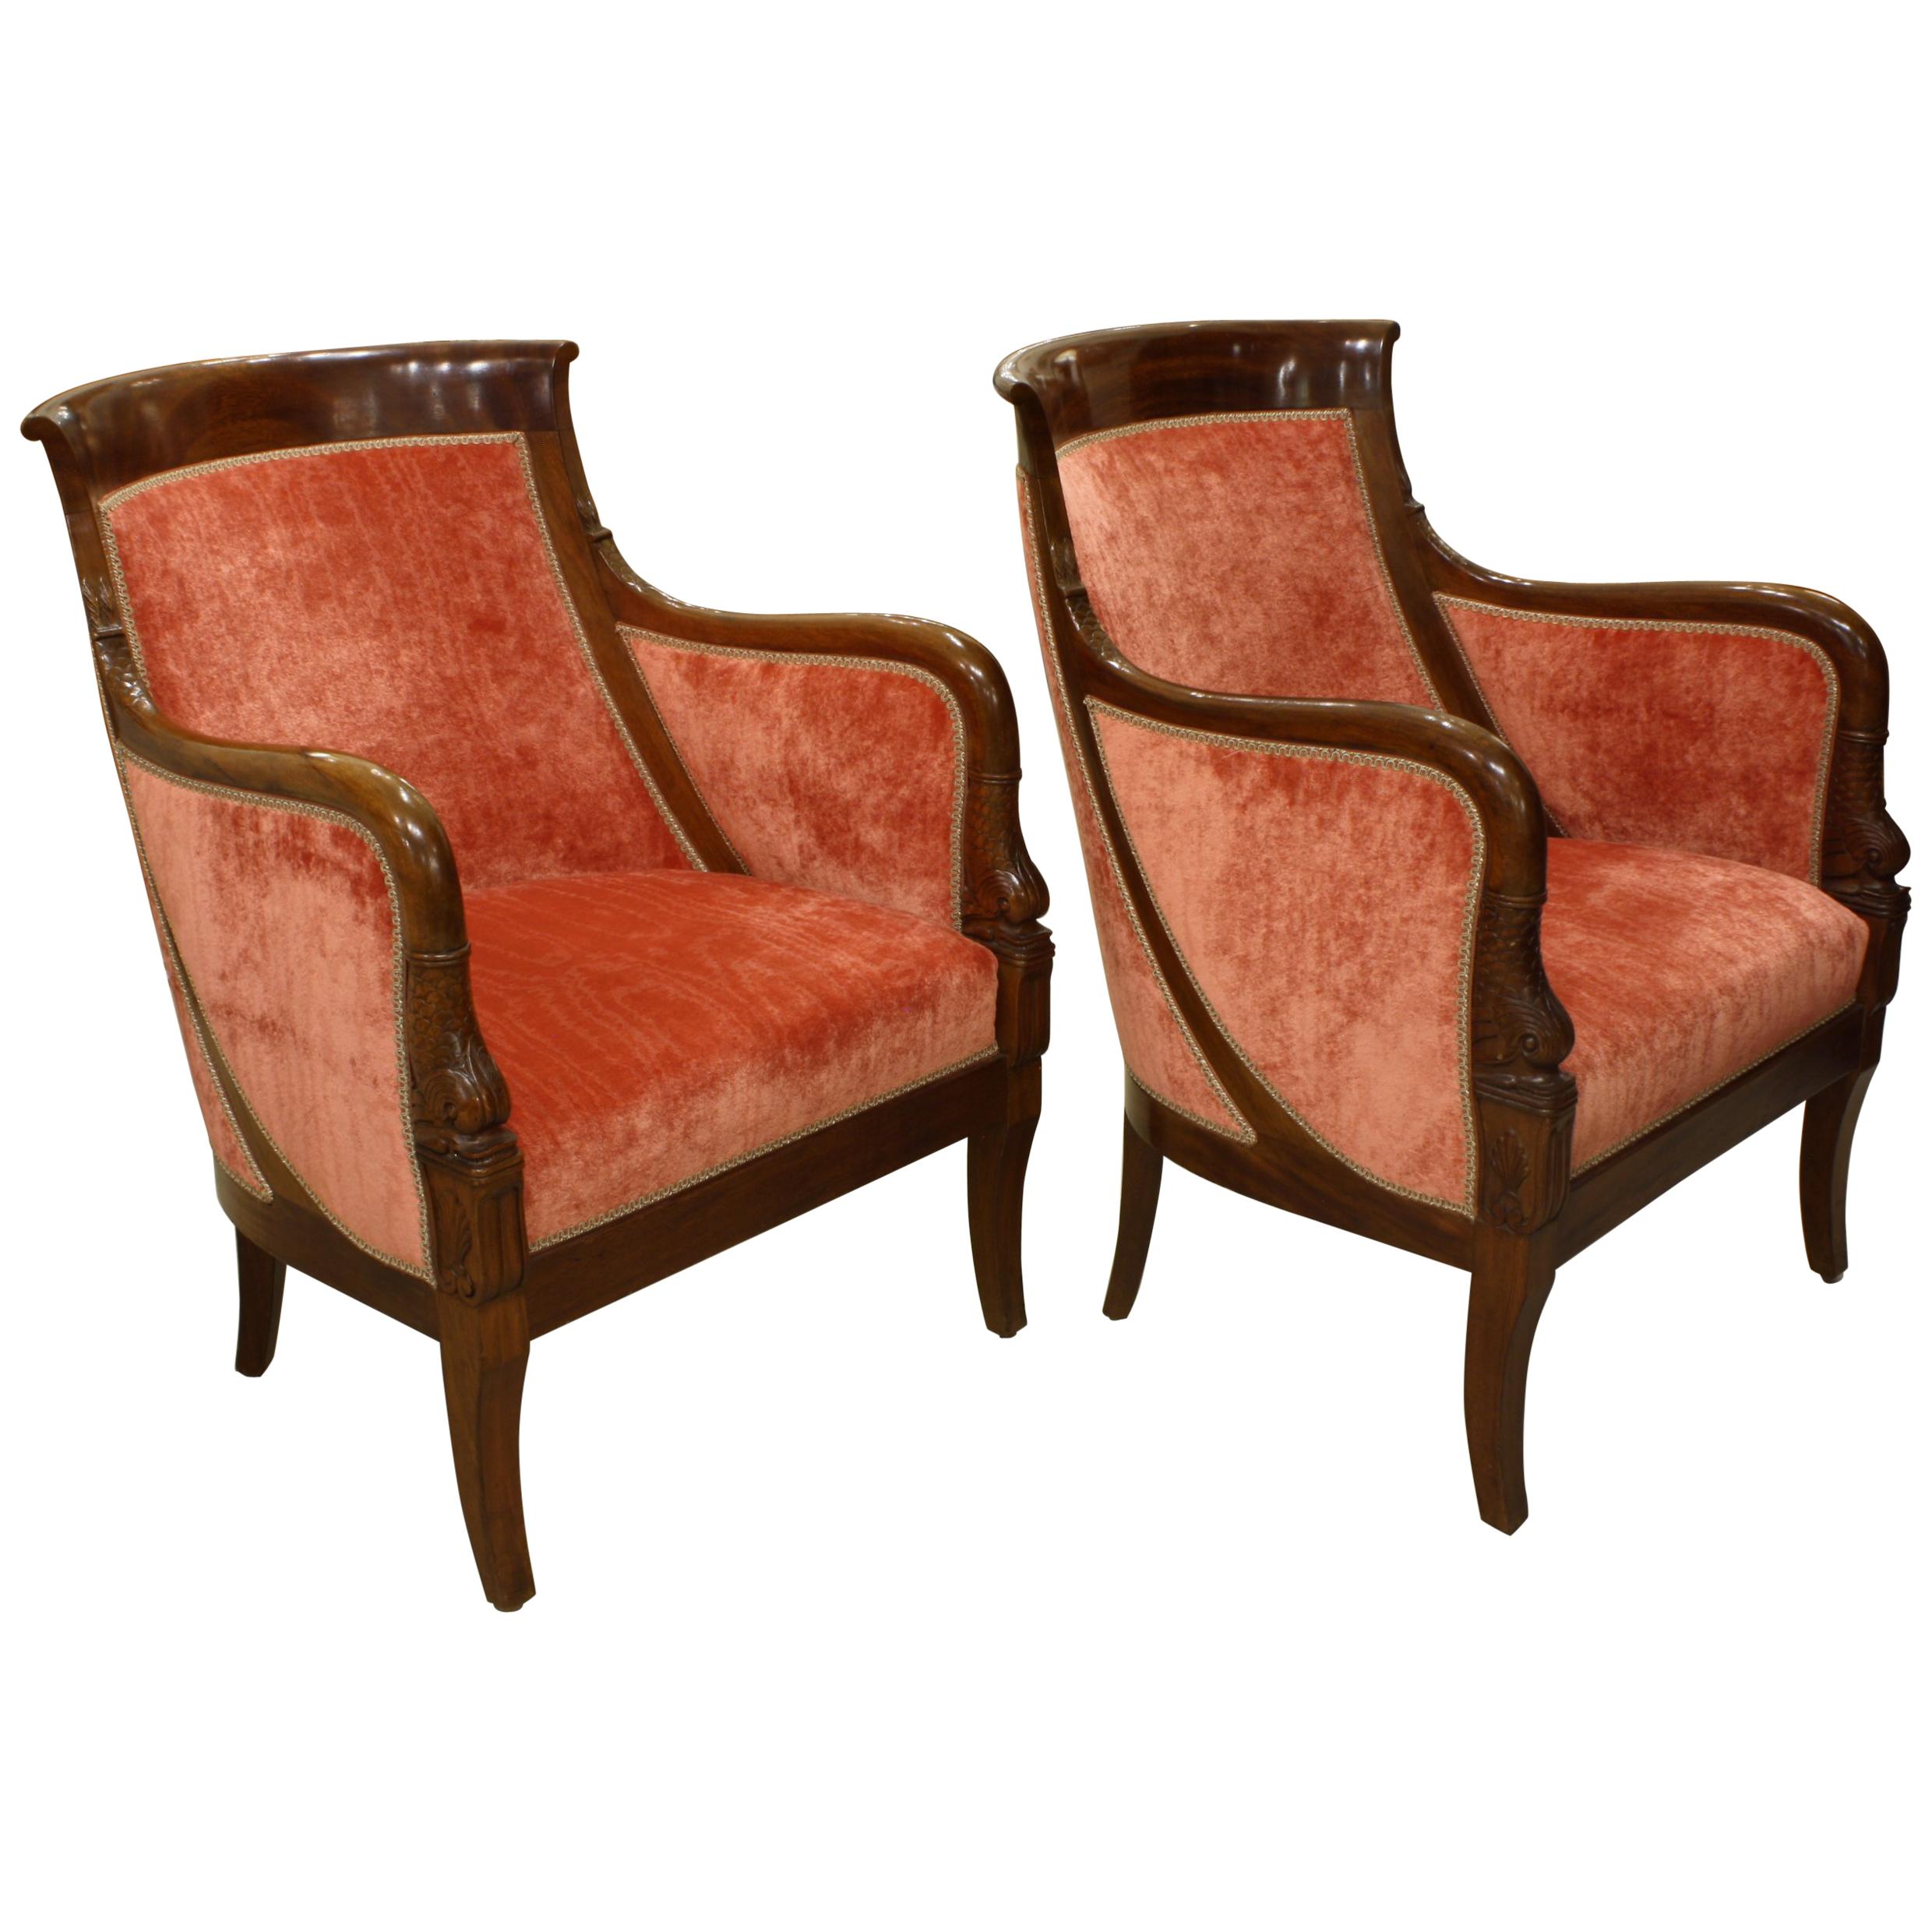 Pair of French Empire Style Mahogany Bergere Armchairs with Dolphins